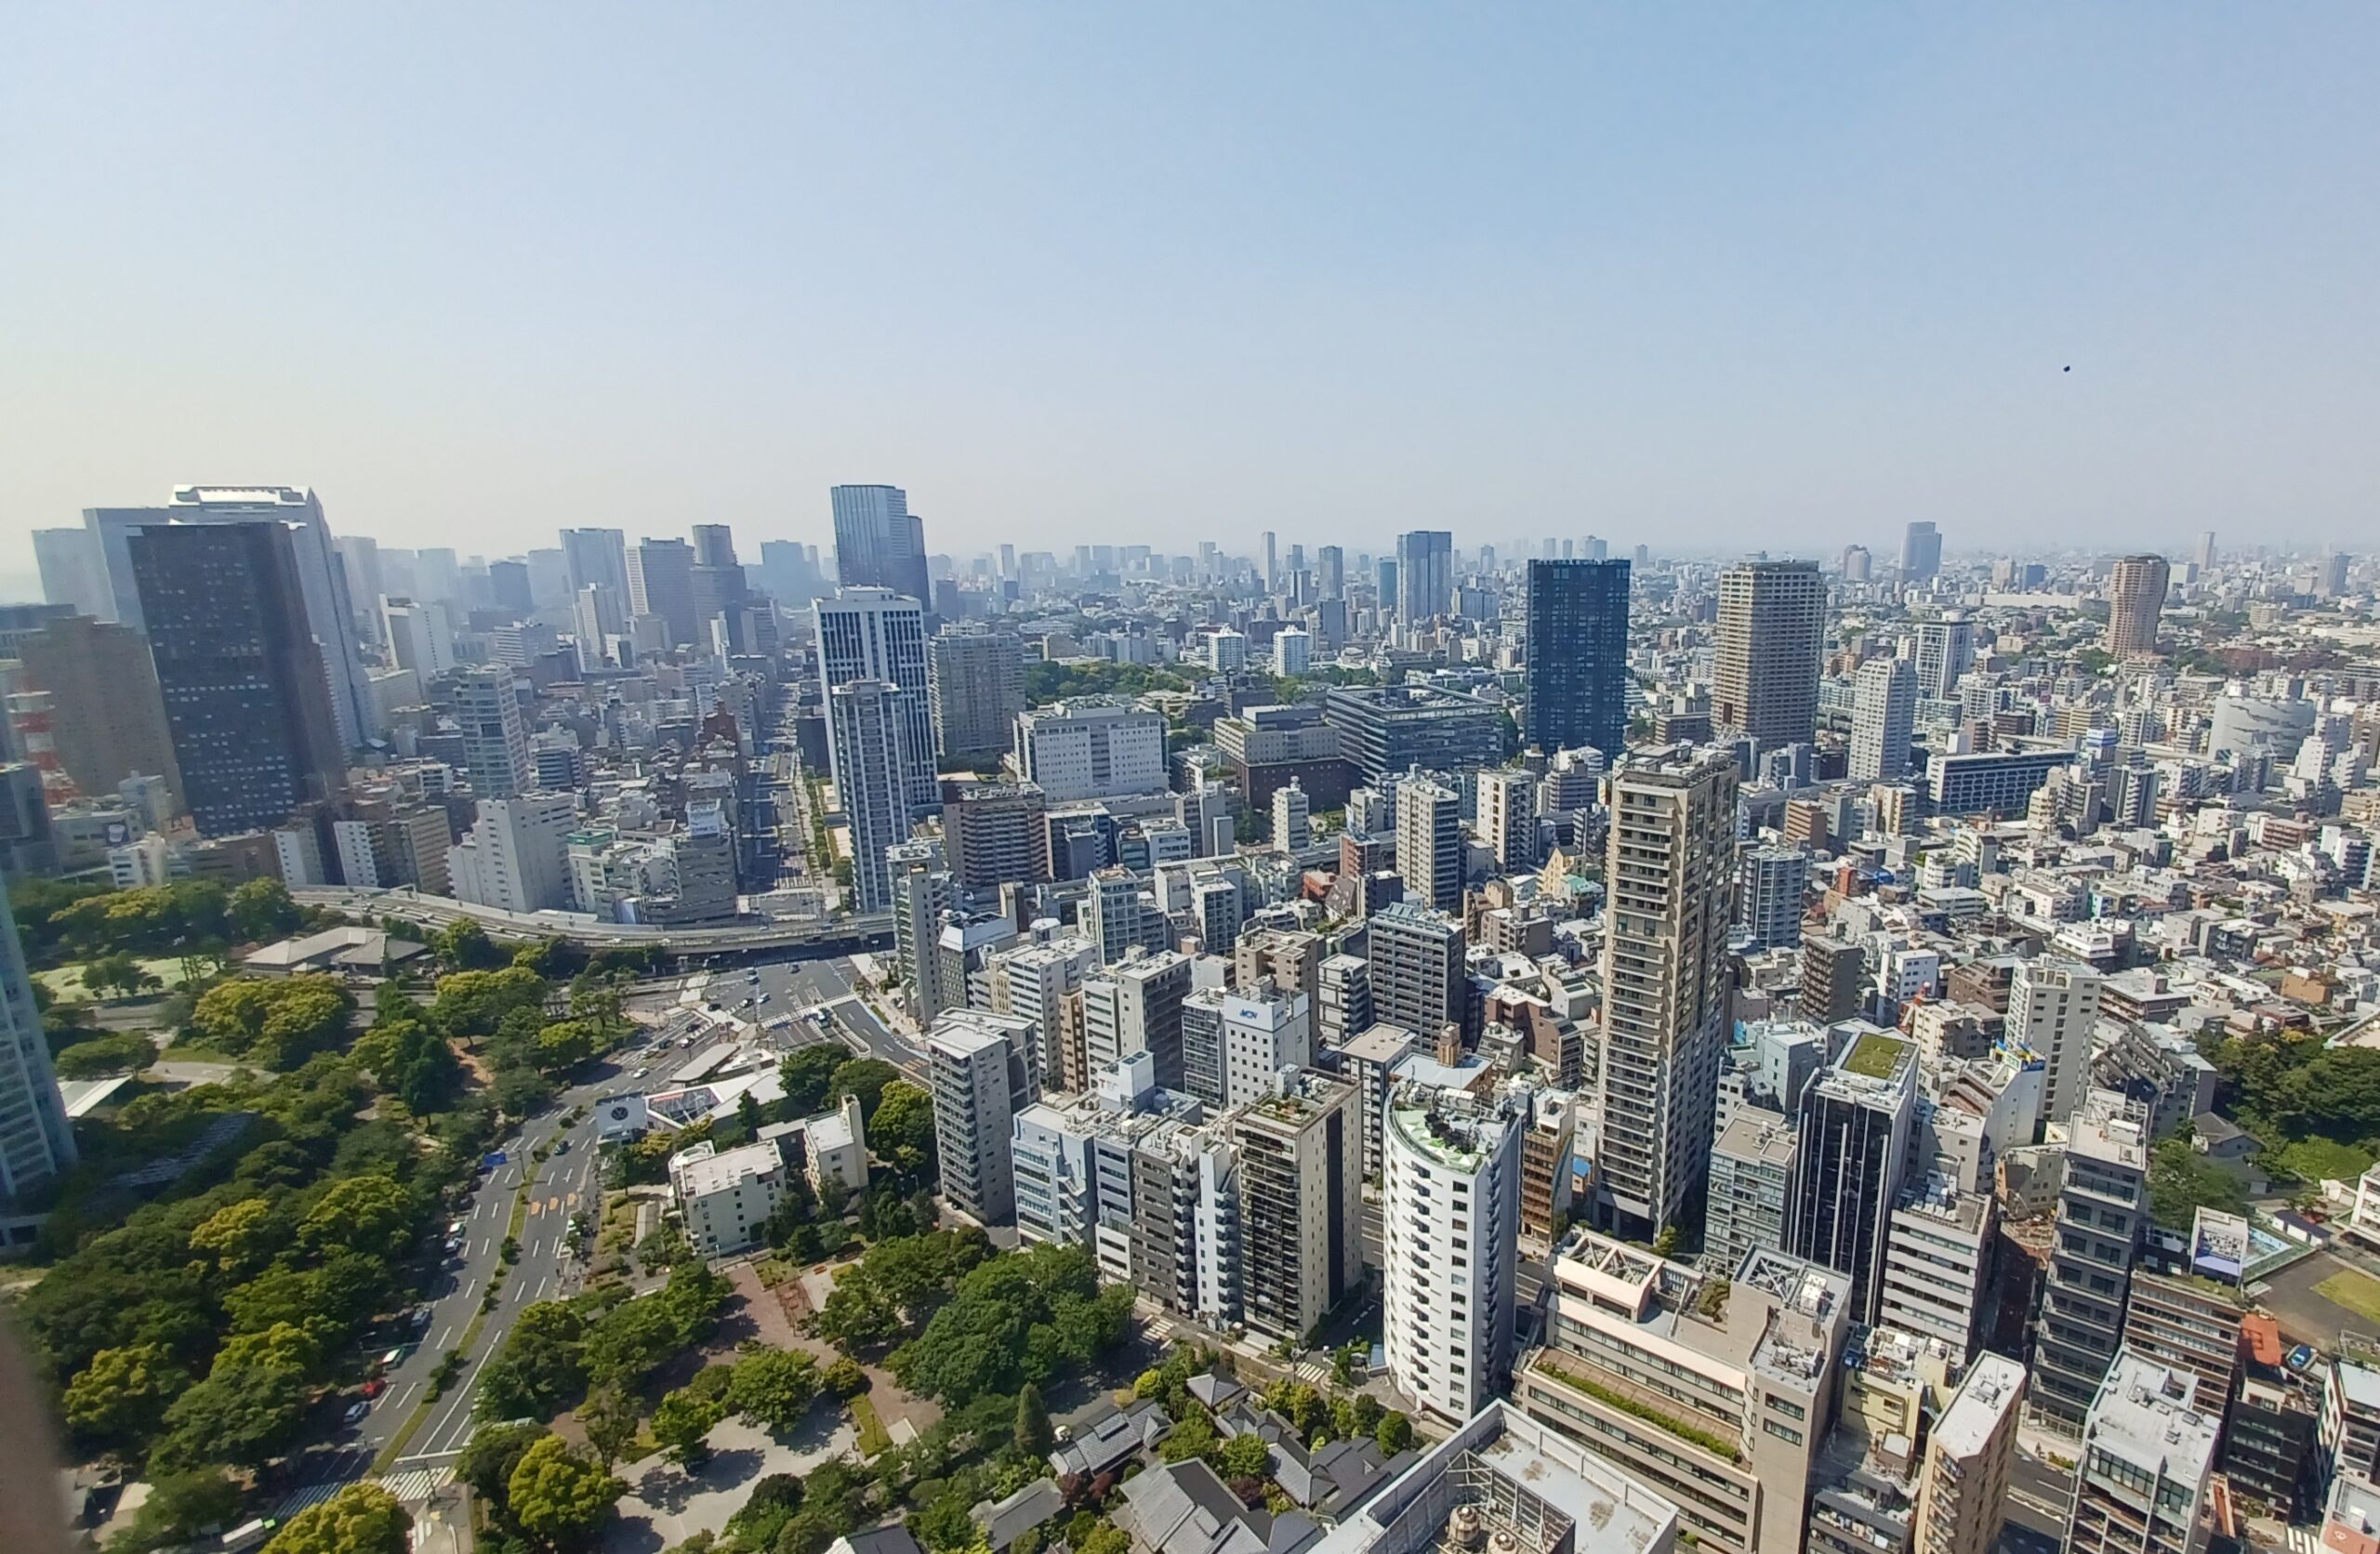 A bunch of high skyscrapers and some green areas (trees), view from Tokyo Tower.